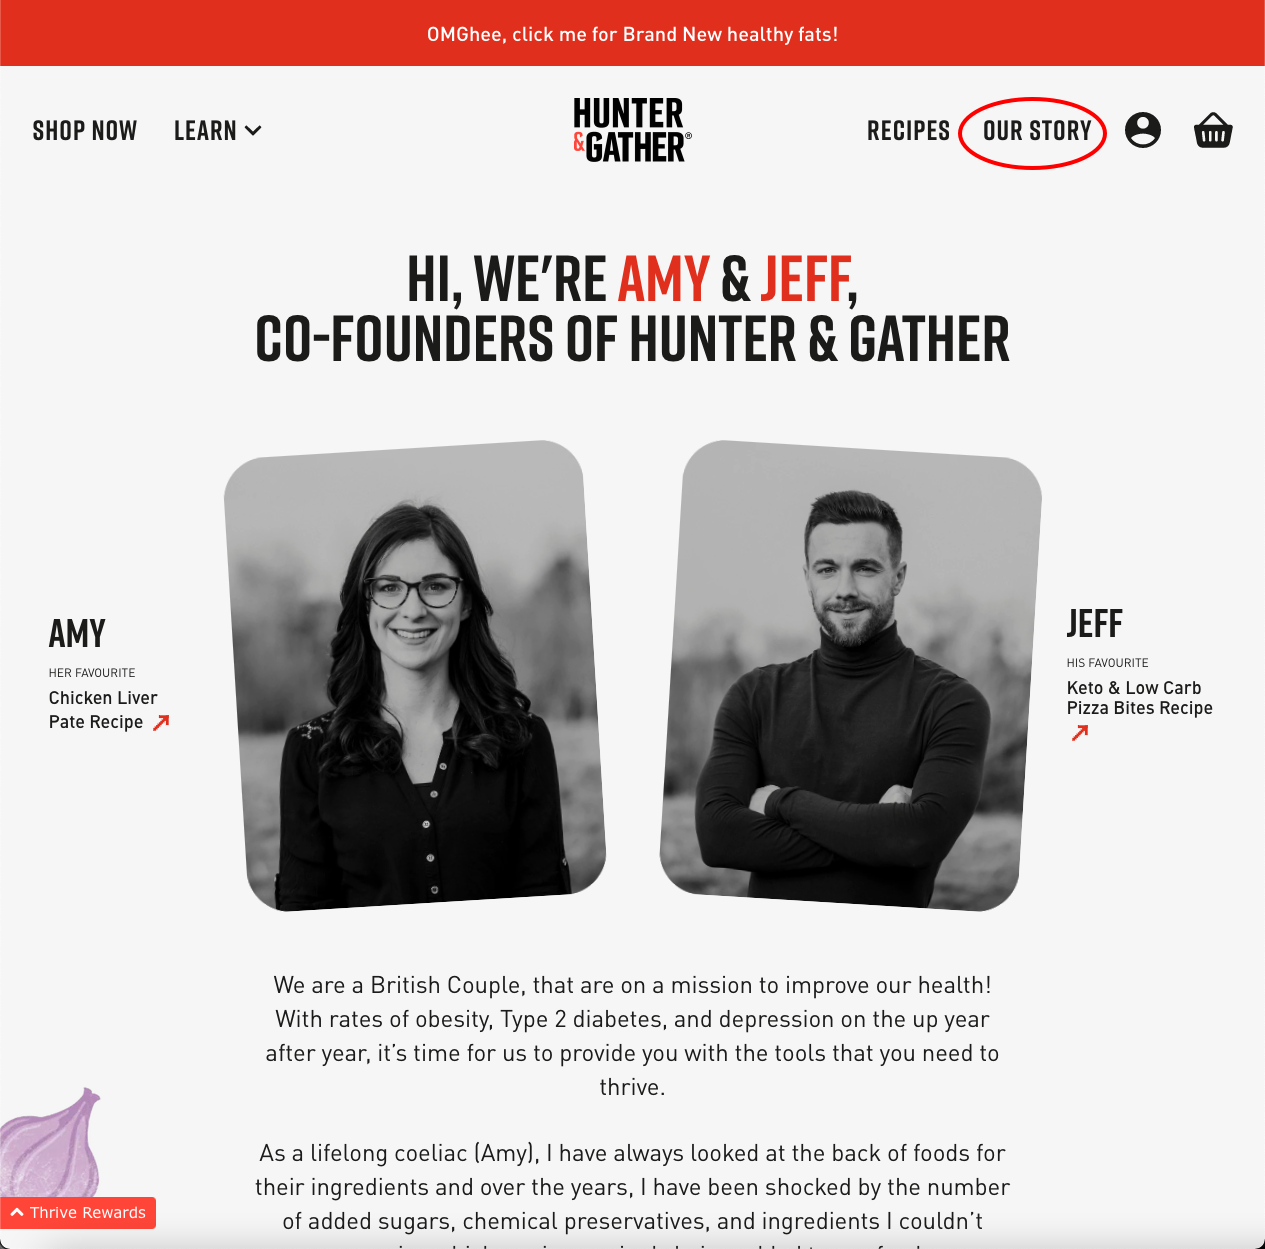 The Hunter & Gather website shows off their why we exist story.